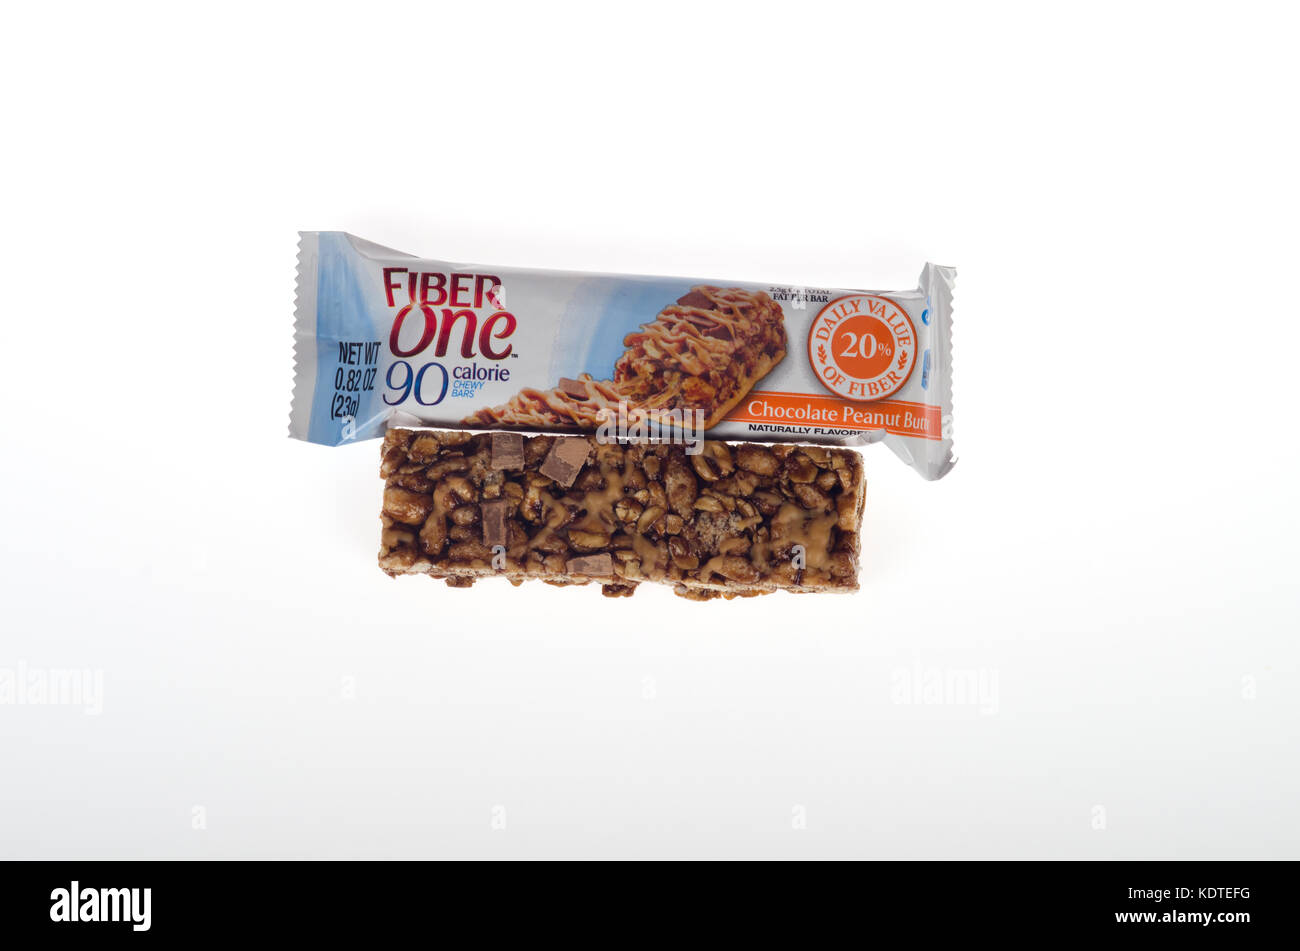 Fiber One Chocolate Peanut snack bar with packaging on white background cutout USA Stock Photo